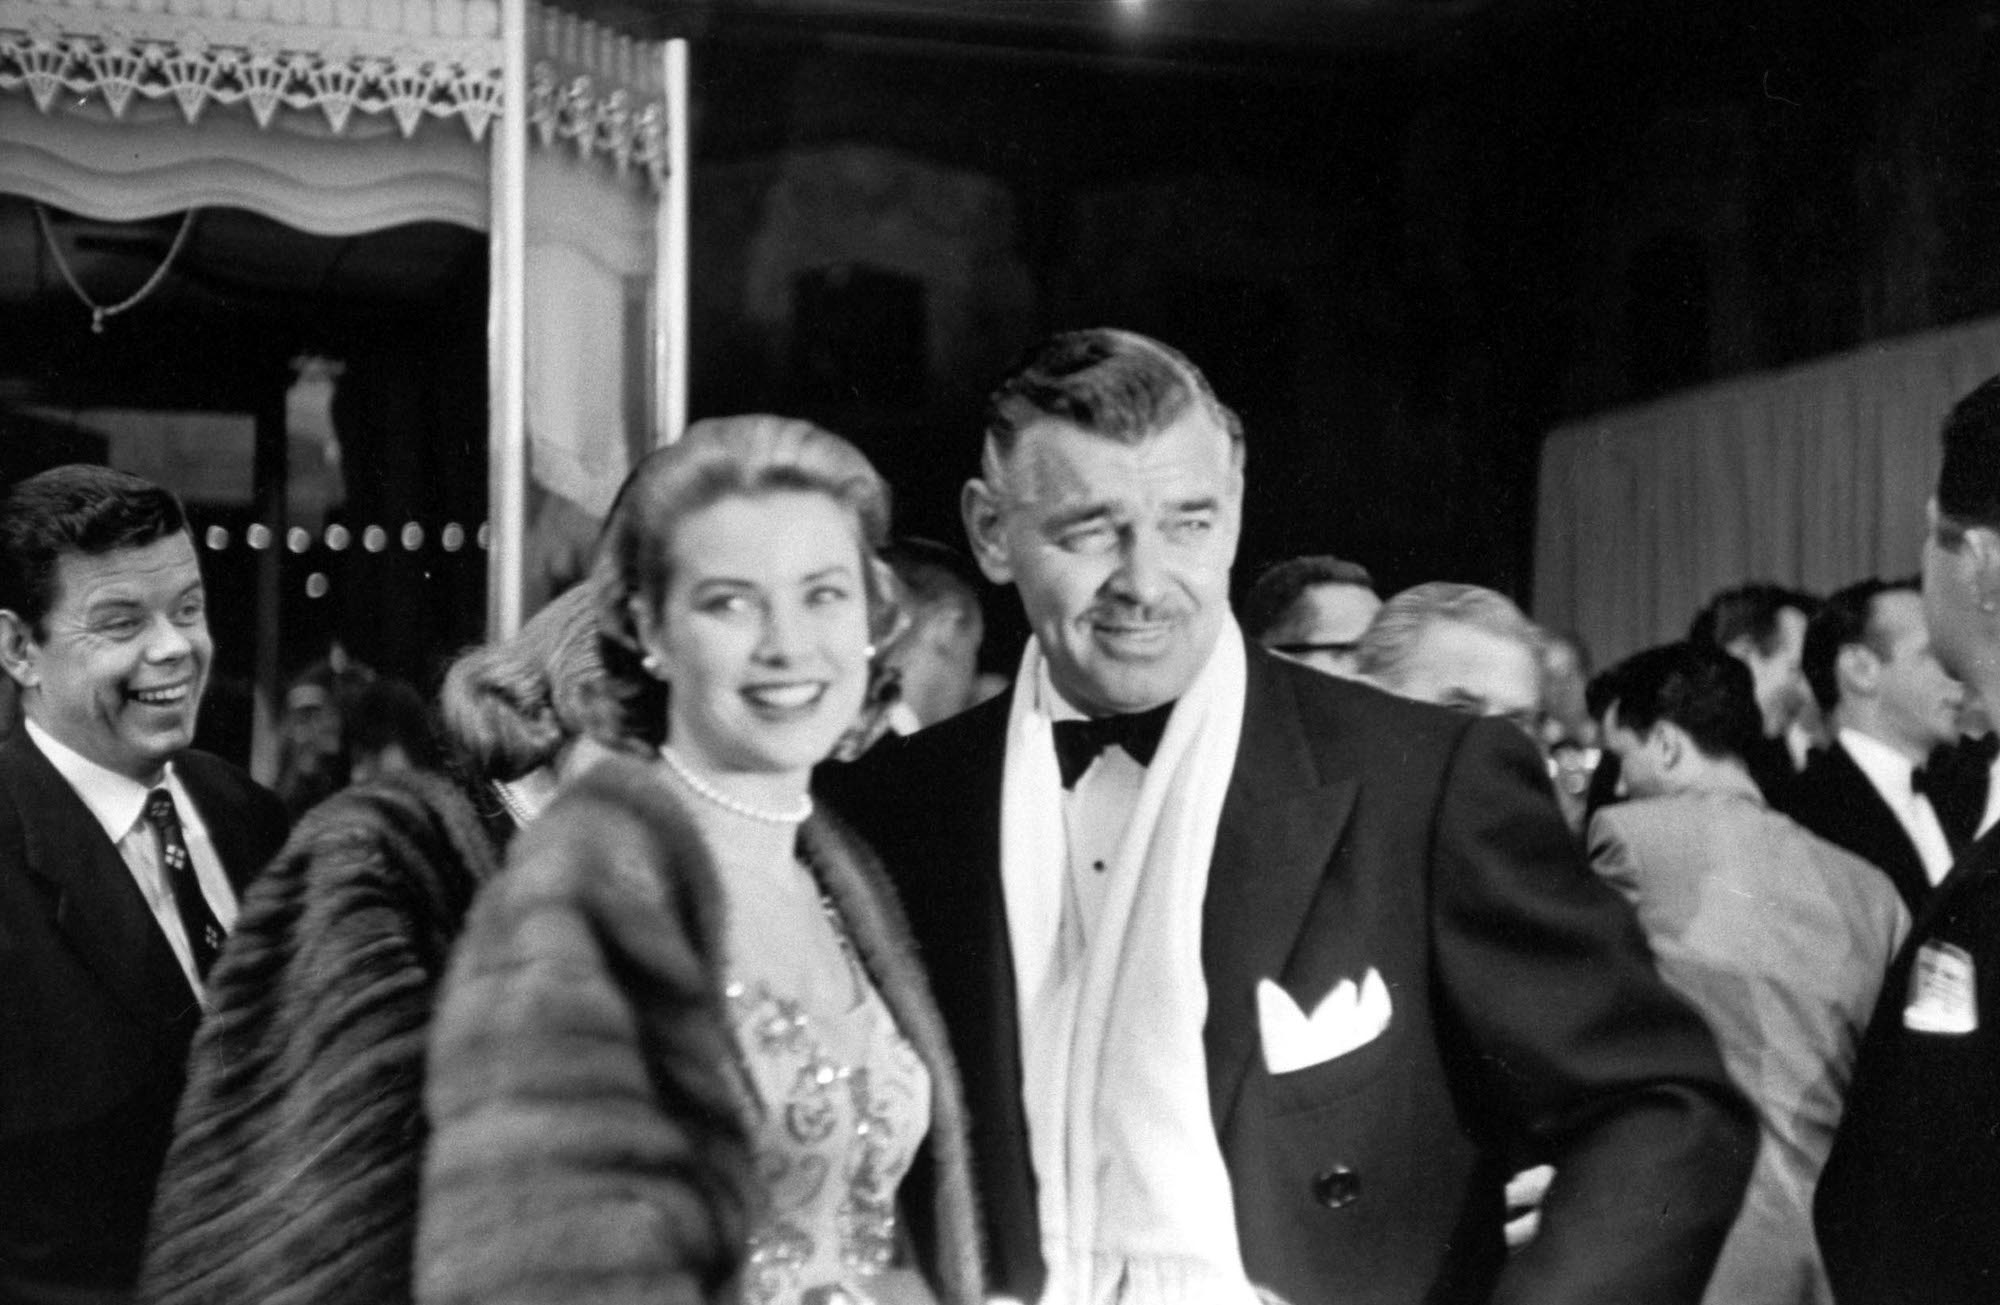 Actor Clark Gable with actress Grace Kelly